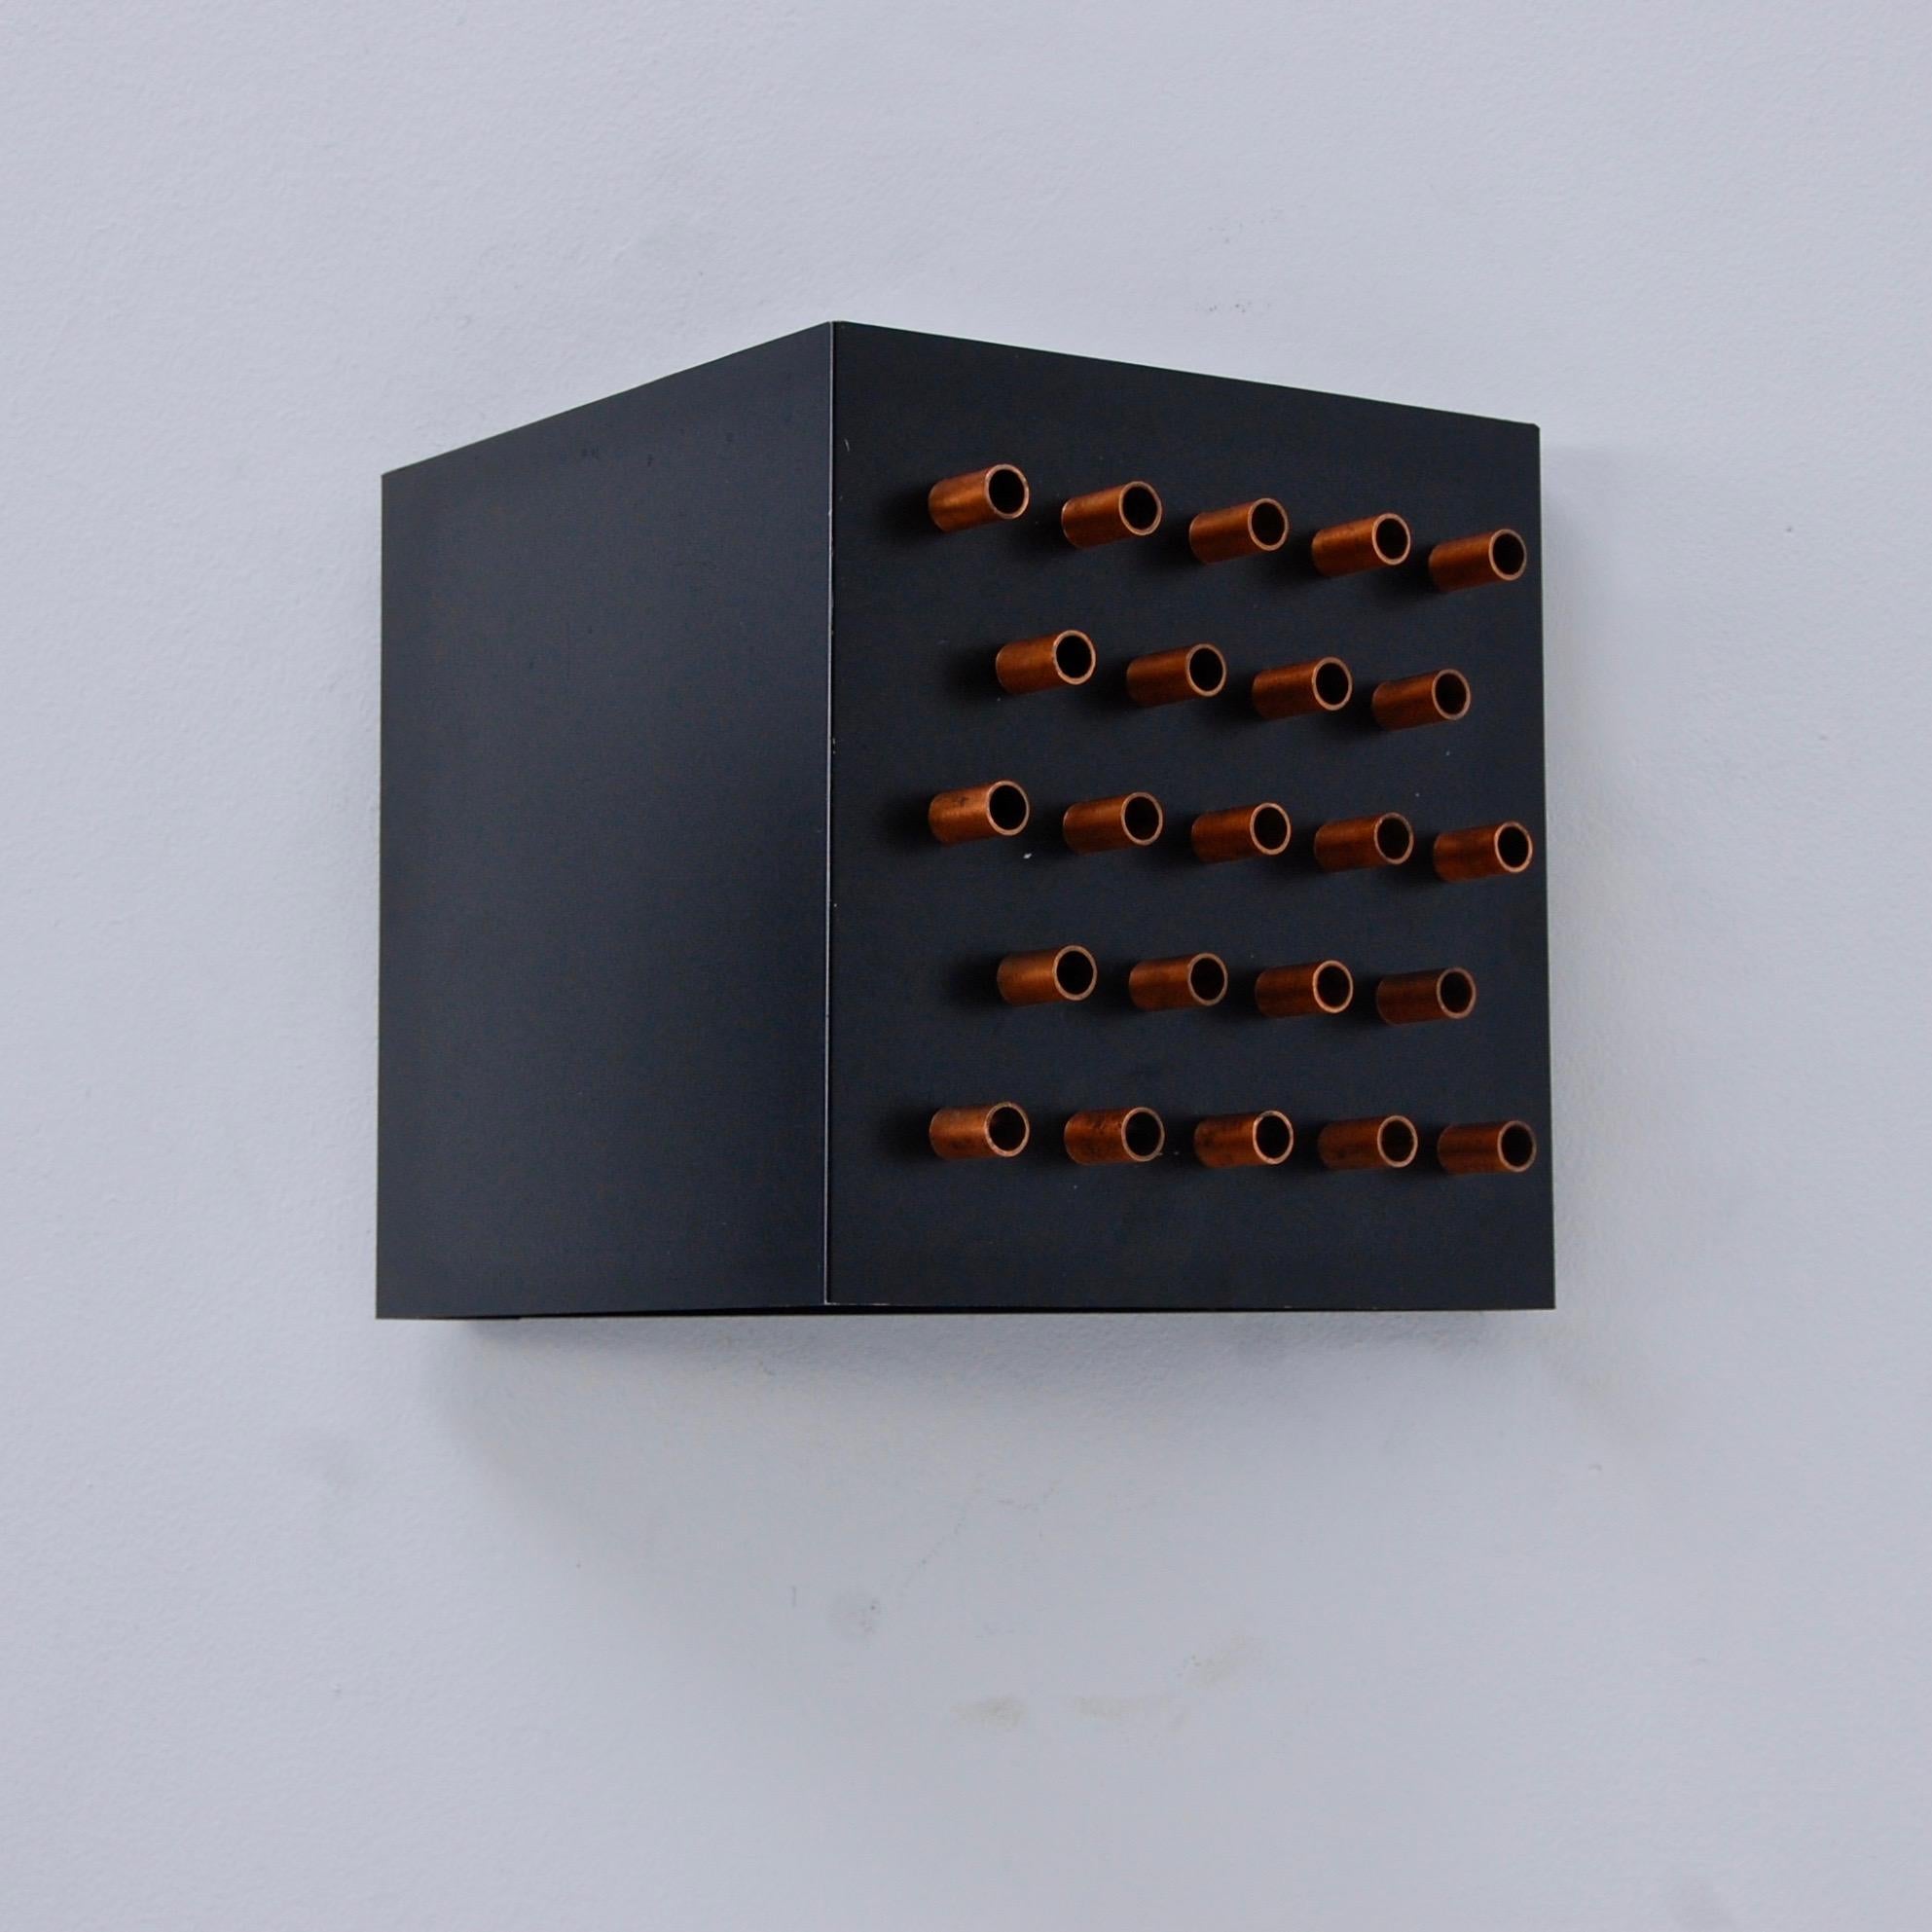 Pair of cube 1960s ‘Claire Obscure’ sconces by RAAK of Amsterdam. Partially restored in steel and copper. Single E26 based socket per sconce. Maximum wattage 75 watts per sconce. Currently wired for use in the US. Priced as a